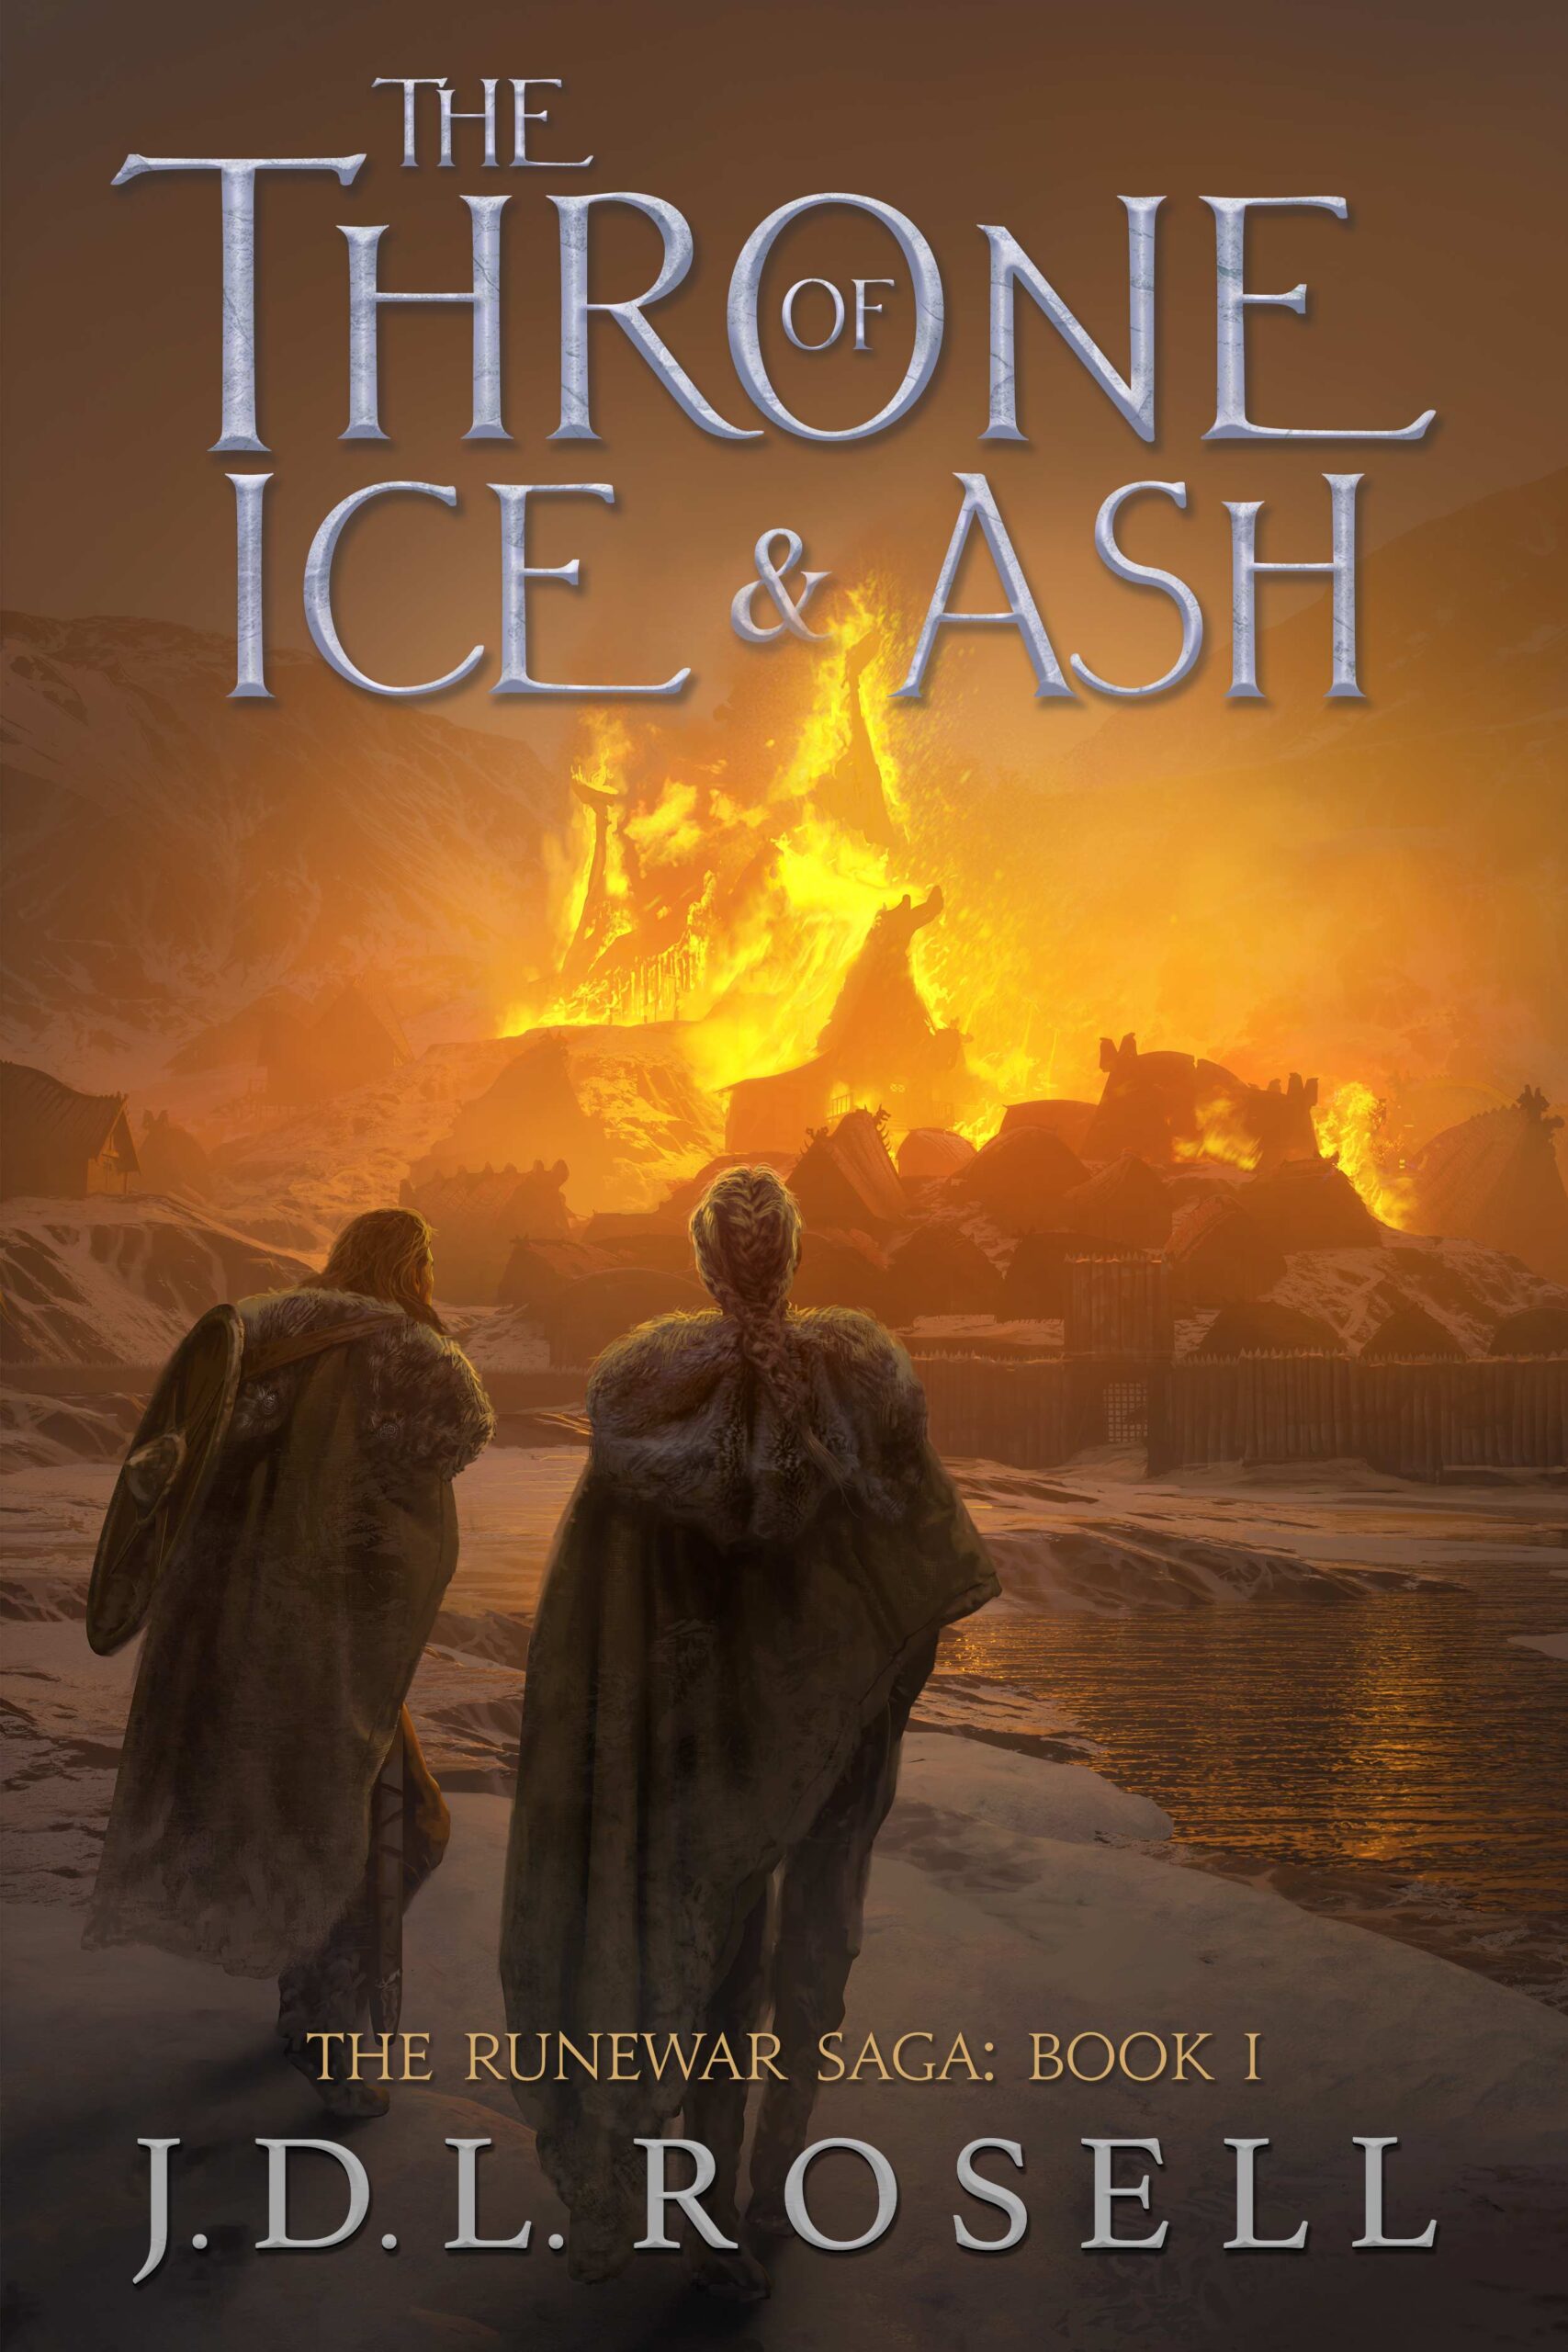 FREE: The Throne of Ice & Ash (The Runewar Saga, Book 1) by J.D.L. Rosell